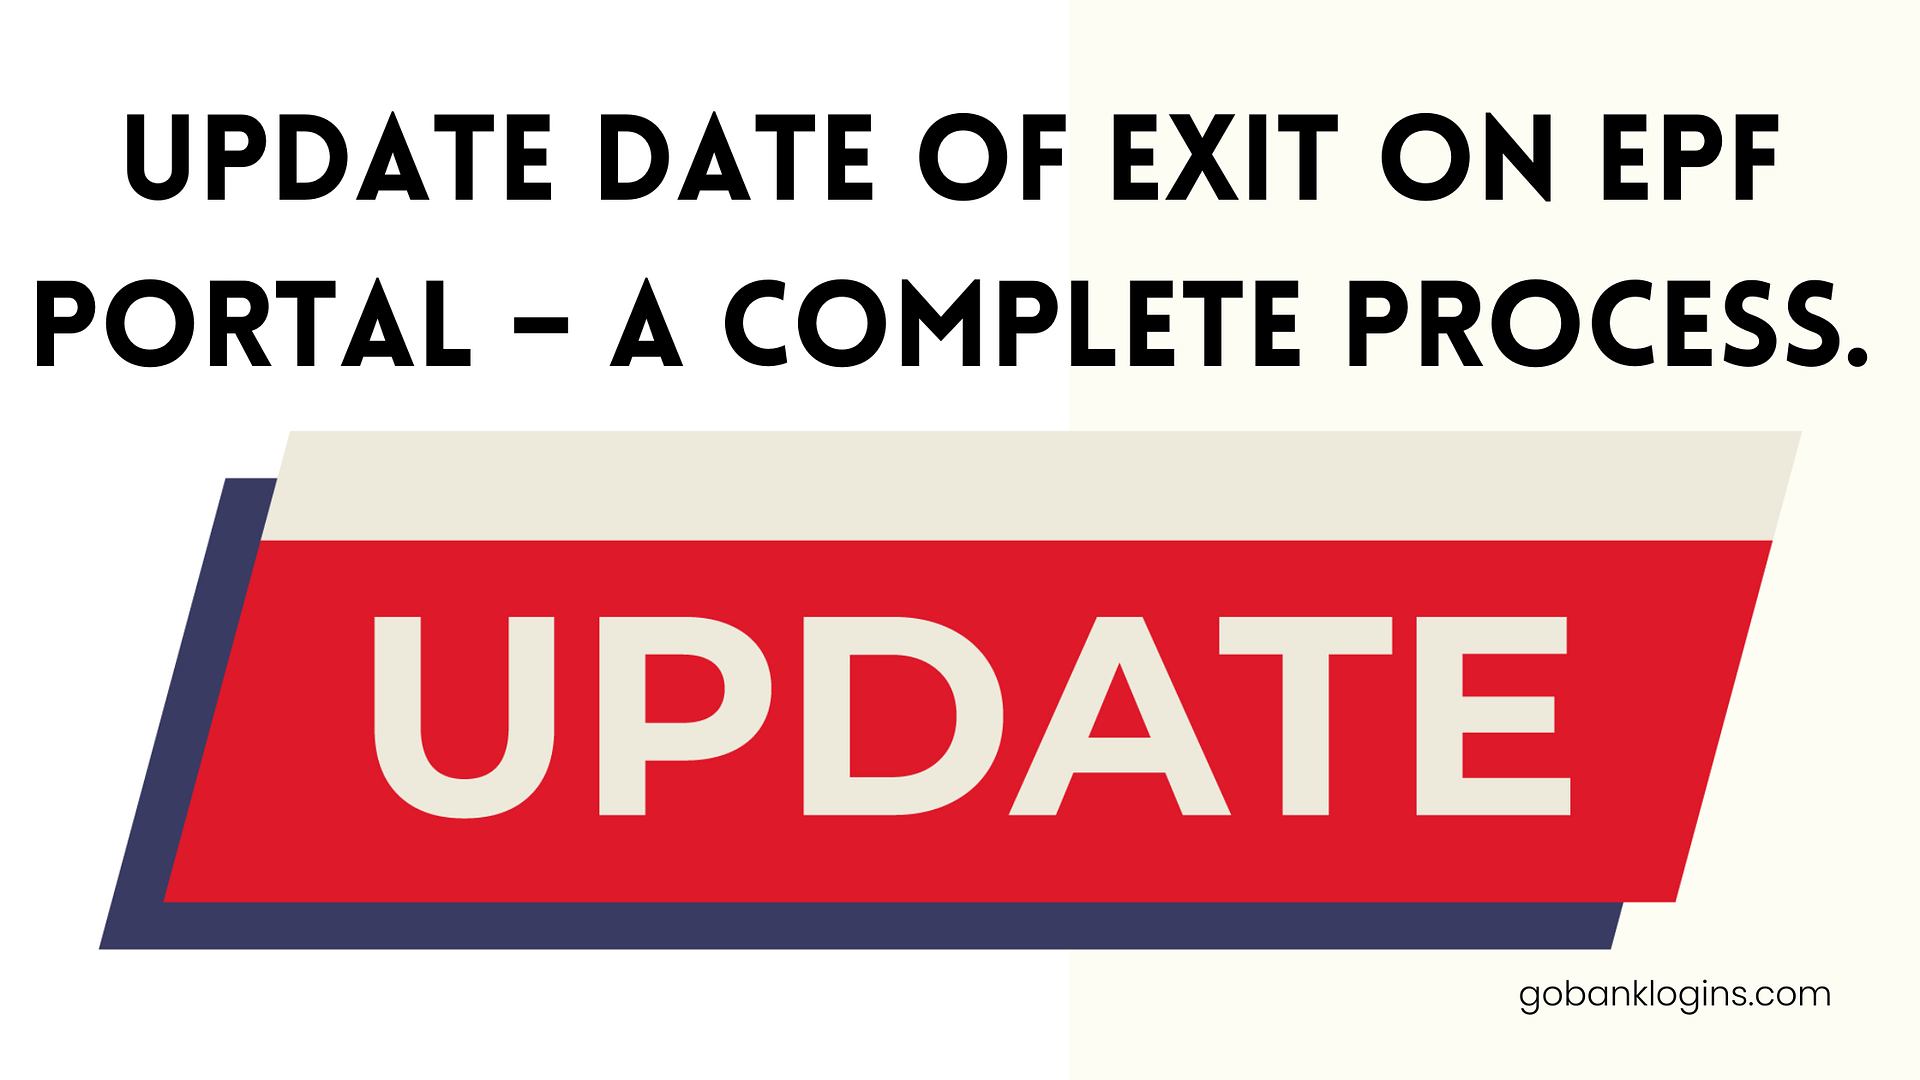 Update Date of Exit on EPF Portal